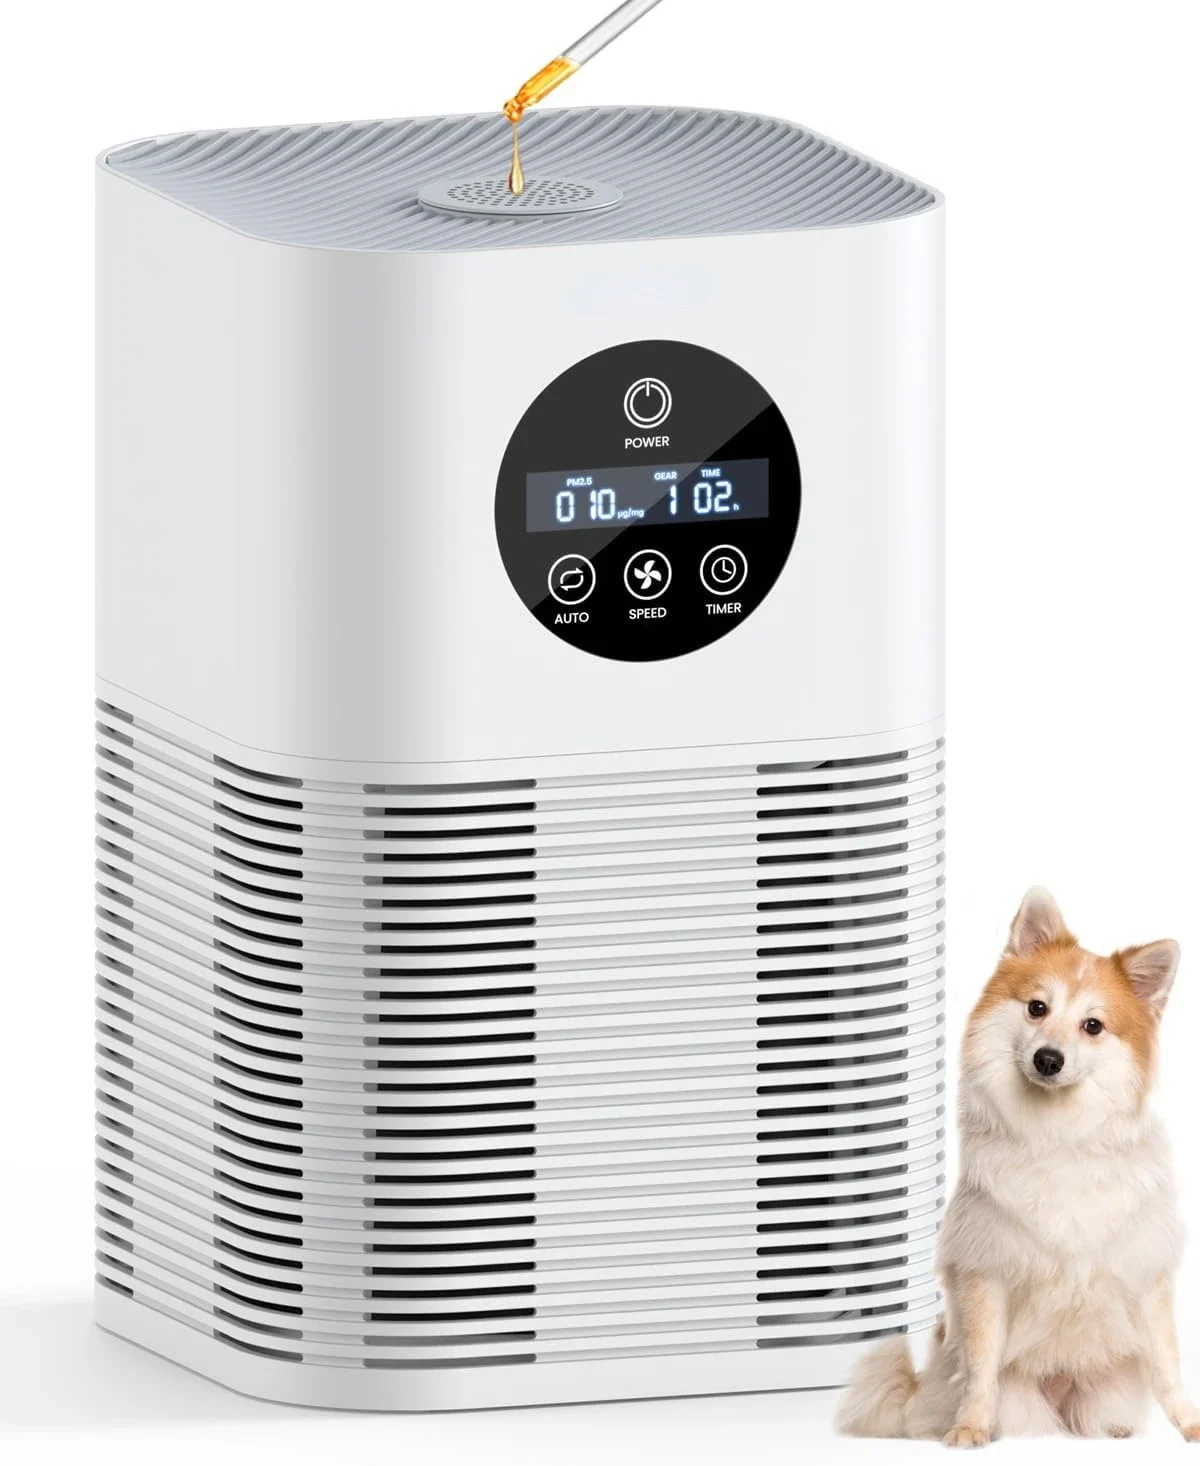 

Quiet Air Purifier with H13 True Hepa Filter for Pets, Smoke, Pollen - Powerful Air Purifier for Large Room up to 600 Ft² - 3 F